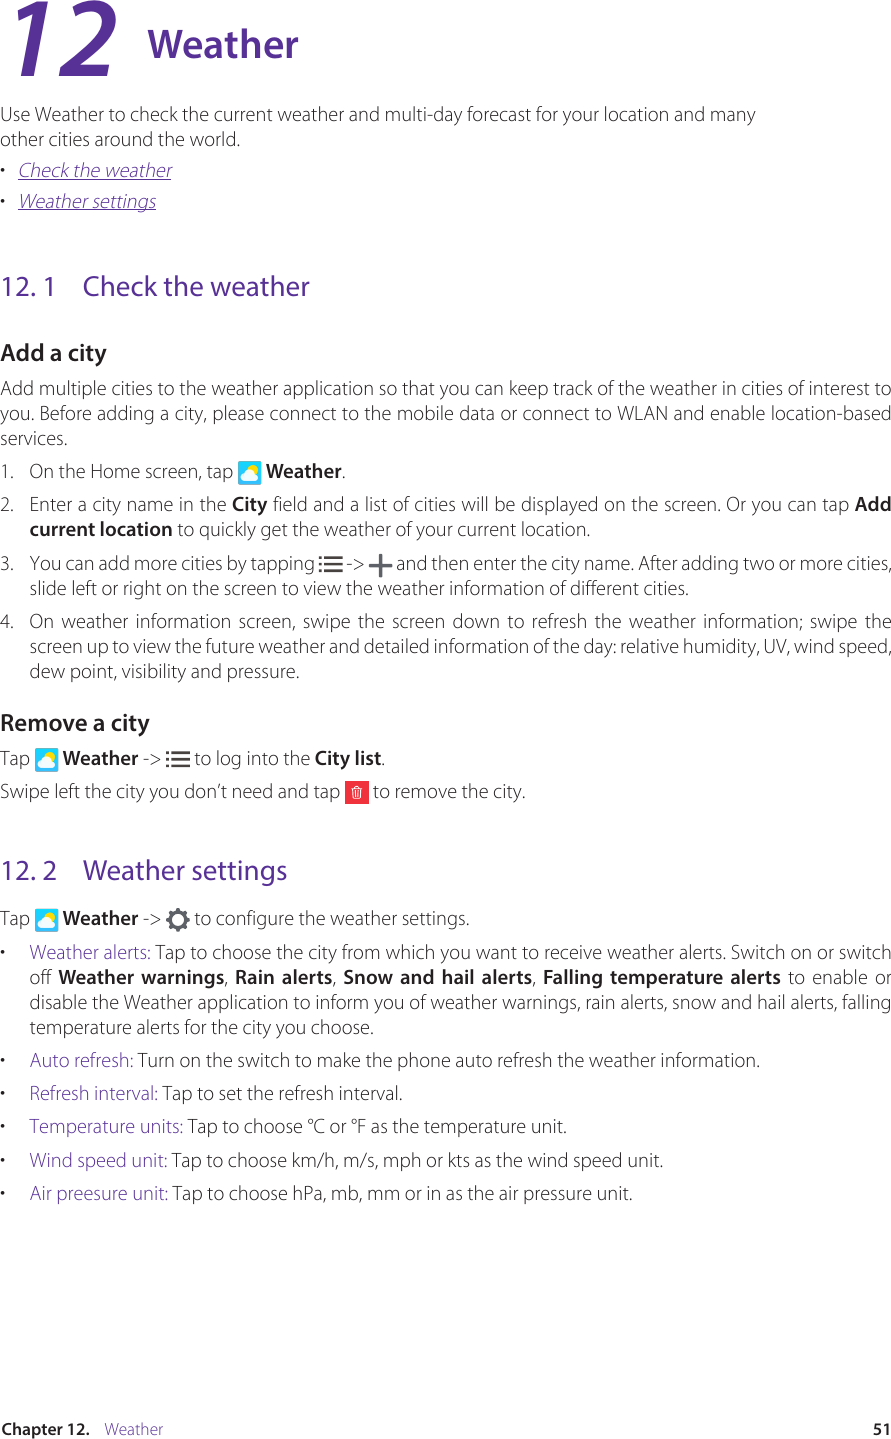 51Chapter 12.    WeatherWeatherUse Weather to check the current weather and multi-day forecast for your location and many other cities around the world. •  Check the weather•  Weather settings12. 1  Check the weatherAdd a cityAdd multiple cities to the weather application so that you can keep track of the weather in cities of interest to you. Before adding a city, please connect to the mobile data or connect to WLAN and enable location-based services.1.  On the Home screen, tap   Weather.2.  Enter a city name in the City field and a list of cities will be displayed on the screen. Or you can tap Add current location to quickly get the weather of your current location.3.  You can add more cities by tapping   -&gt;   and then enter the city name. After adding two or more cities, slide left or right on the screen to view the weather information of different cities.4.  On weather information screen, swipe the screen down to refresh the weather information; swipe the screen up to view the future weather and detailed information of the day: relative humidity, UV, wind speed, dew point, visibility and pressure.Remove a cityTap   Weather -&gt;   to log into the City list.Swipe left the city you don’t need and tap   to remove the city.12. 2  Weather settingsTap   Weather -&gt;   to configure the weather settings.•  Weather alerts: Tap to choose the city from which you want to receive weather alerts. Switch on or switch off  Weather warnings, Rain alerts,  Snow and hail alerts, Falling temperature alerts to enable or disable the Weather application to inform you of weather warnings, rain alerts, snow and hail alerts, falling temperature alerts for the city you choose. •  Auto refresh: Turn on the switch to make the phone auto refresh the weather information.•  Refresh interval: Tap to set the refresh interval.•  Temperature units: Tap to choose ℃ or ℉ as the temperature unit.•  Wind speed unit: Tap to choose km/h, m/s, mph or kts as the wind speed unit.•  Air preesure unit: Tap to choose hPa, mb, mm or in as the air pressure unit.12